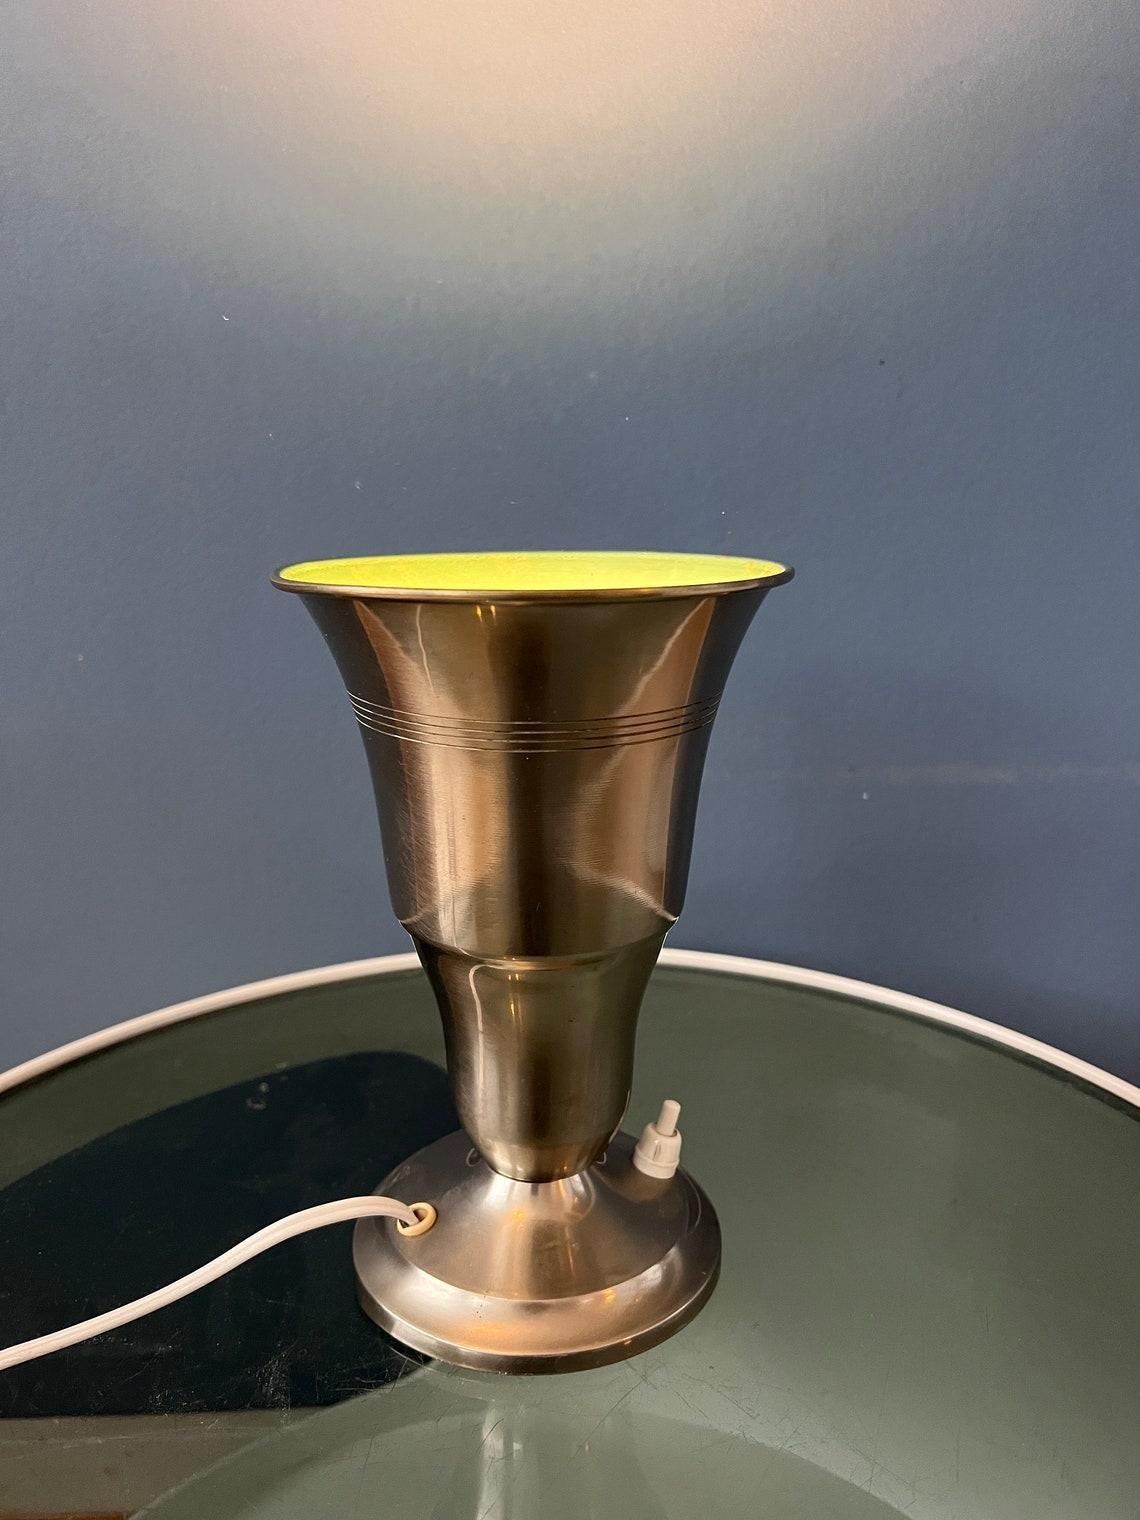 Metal Uplighter 'Cup' table lamp in trumpet shape. The light nicely projects upward, reflecting nicely on the silver surface. The lamp can be switched on and off with a button on the base. The lamp requires an E26/27 lightbulb and currently has an